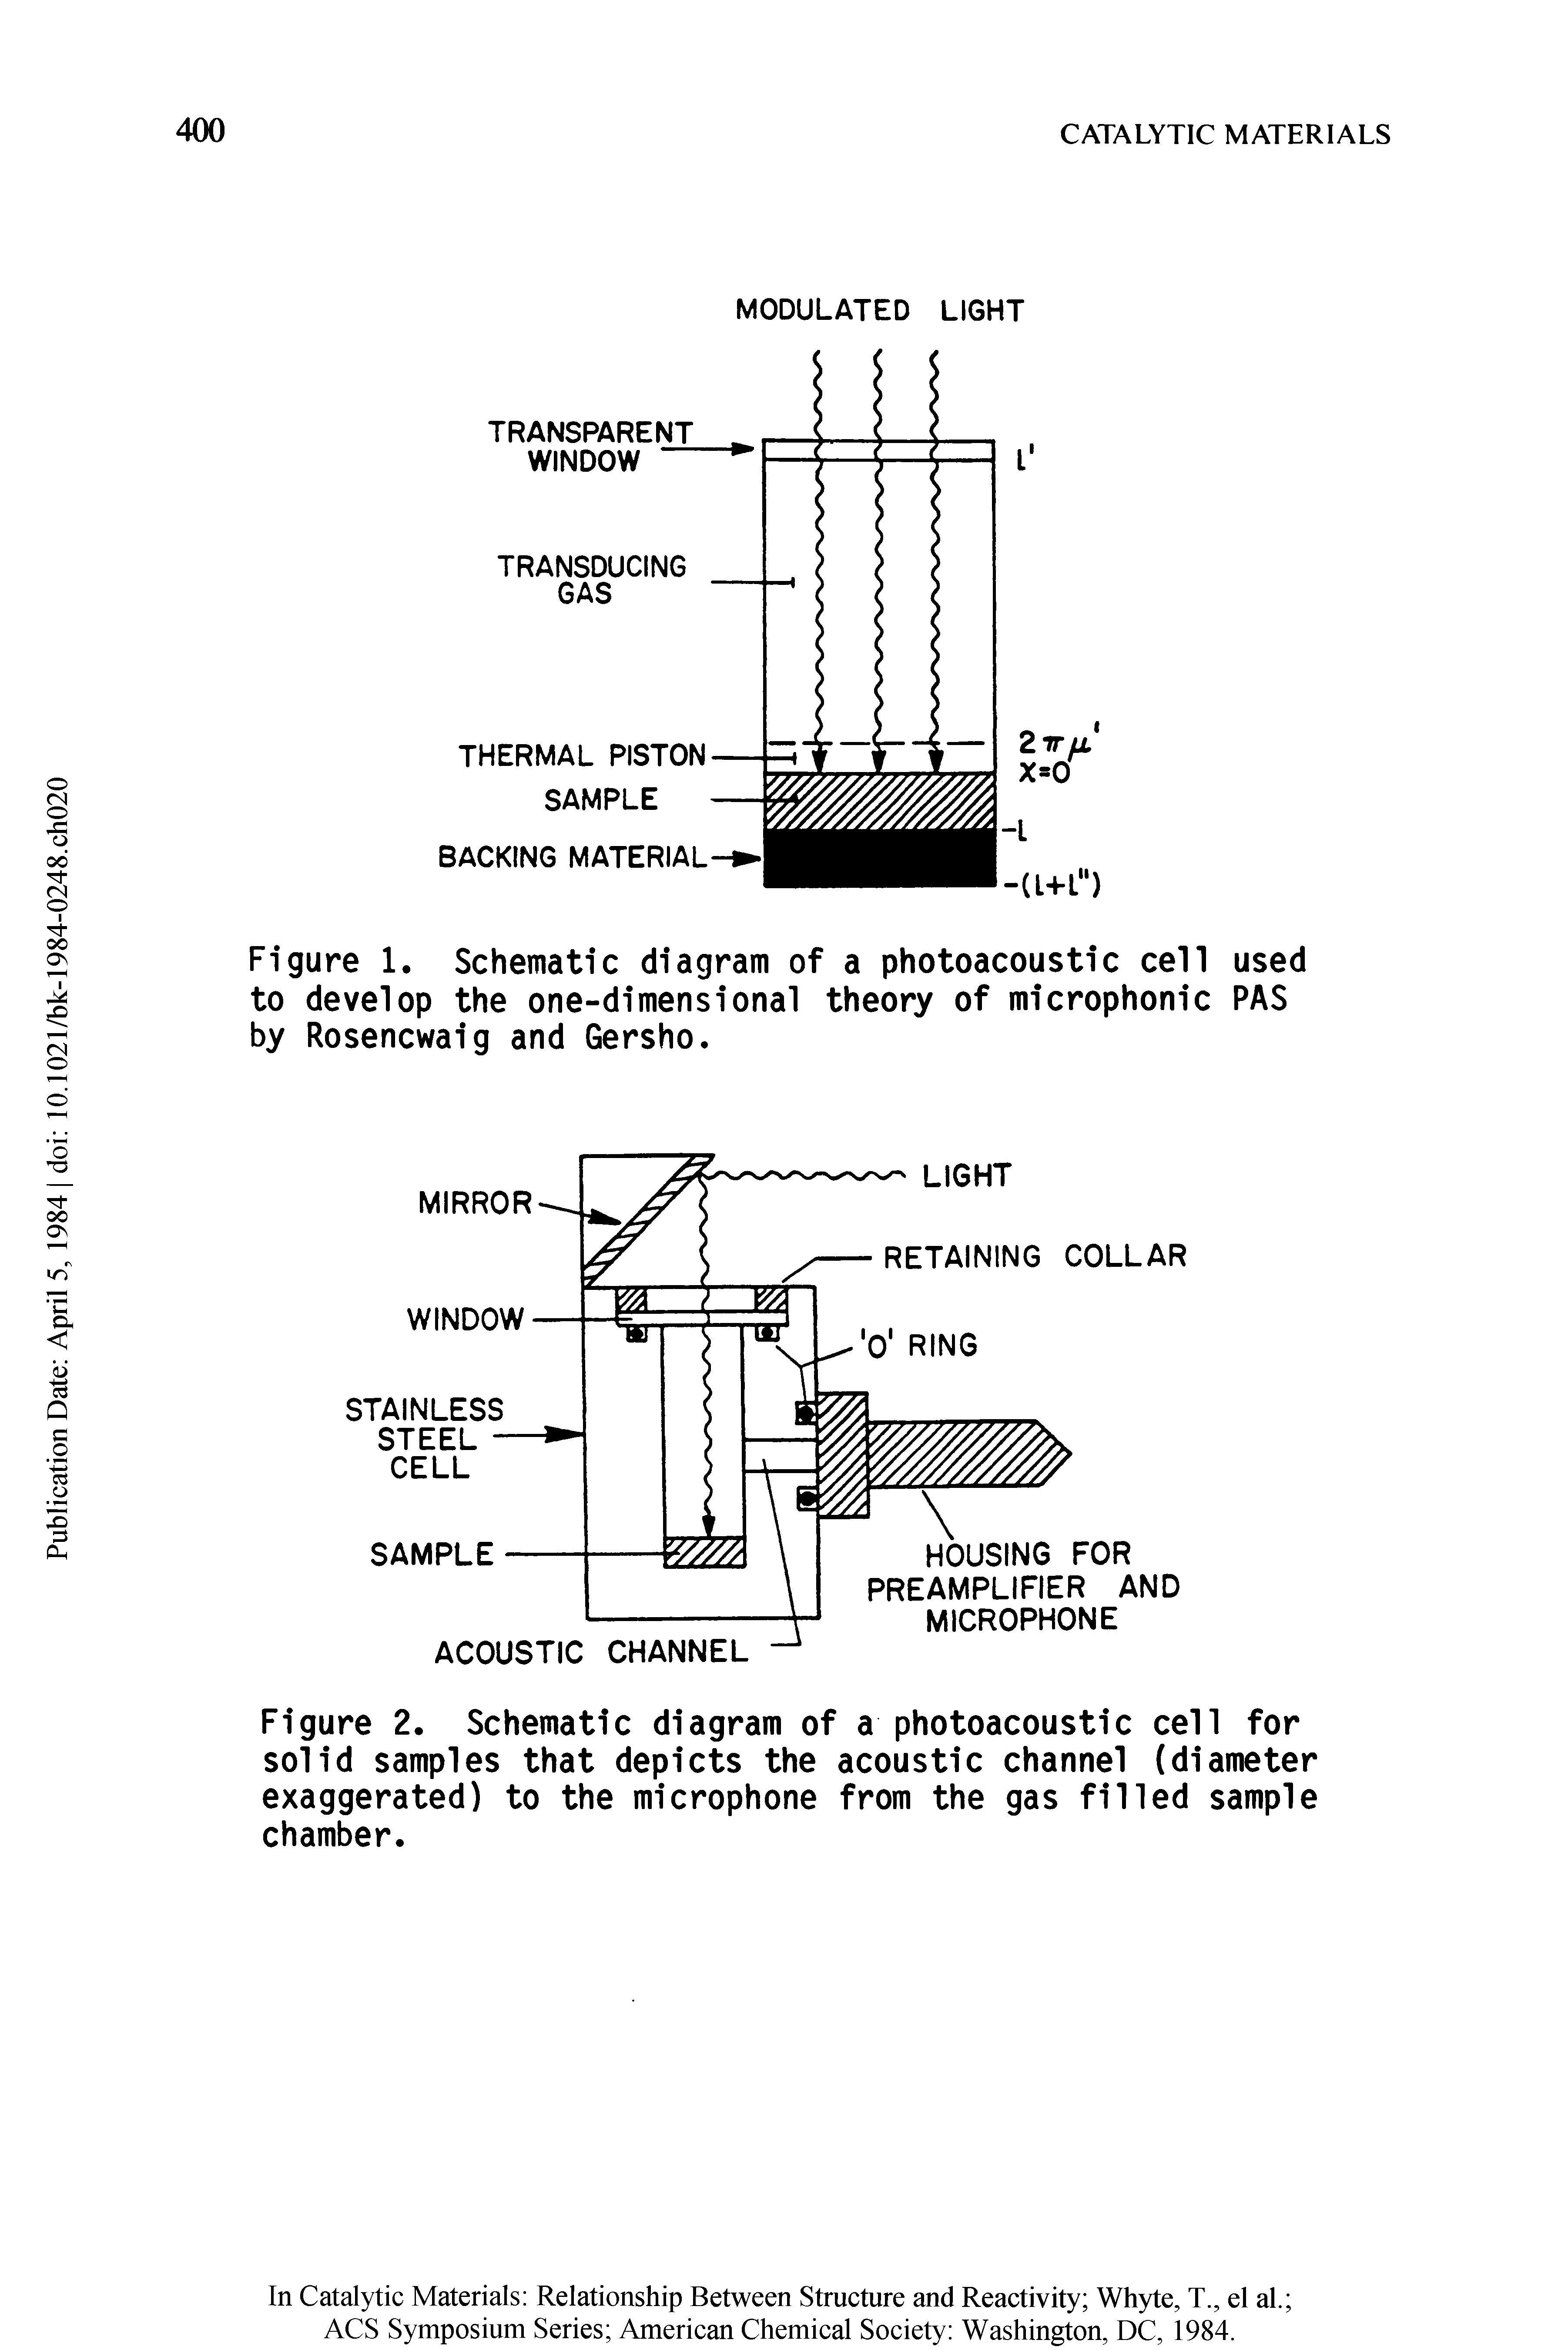 Figure 2. Schematic diagram of a photoacoustic cell for solid samples that depicts the acoustic channel (diameter exaggerated) to the microphone from the gas filled sample chamber.